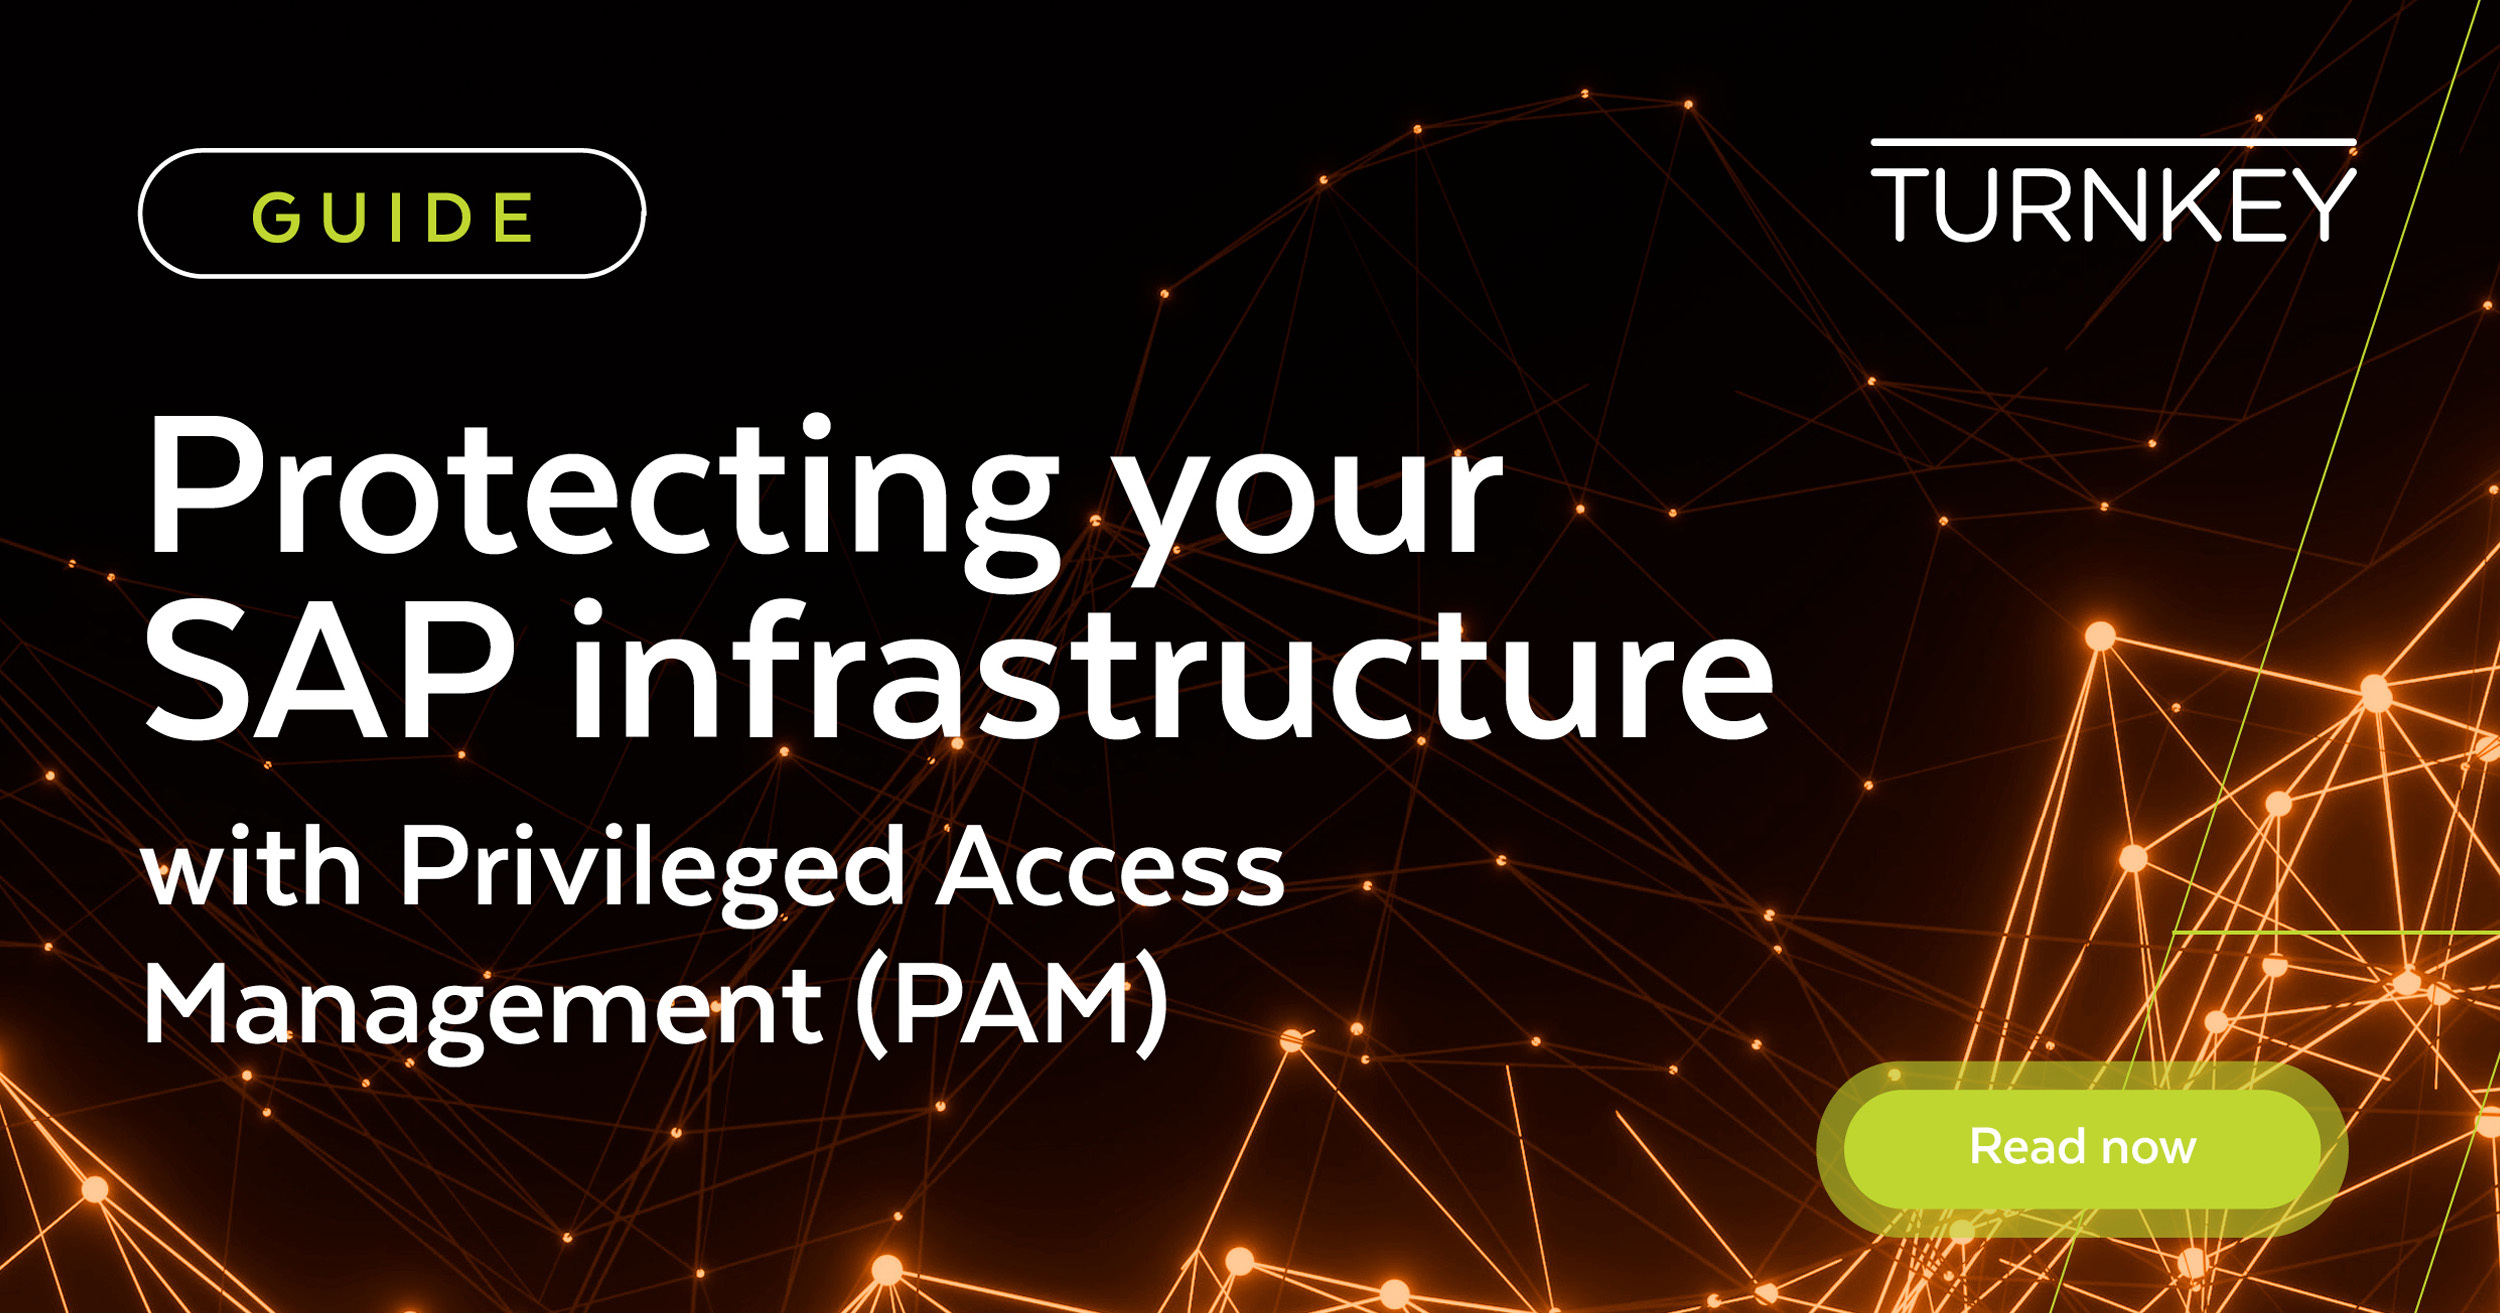 Turnkey_Privileged Access Management  SAP (PAM)_updated styling Banners 12x4 + 12x6752